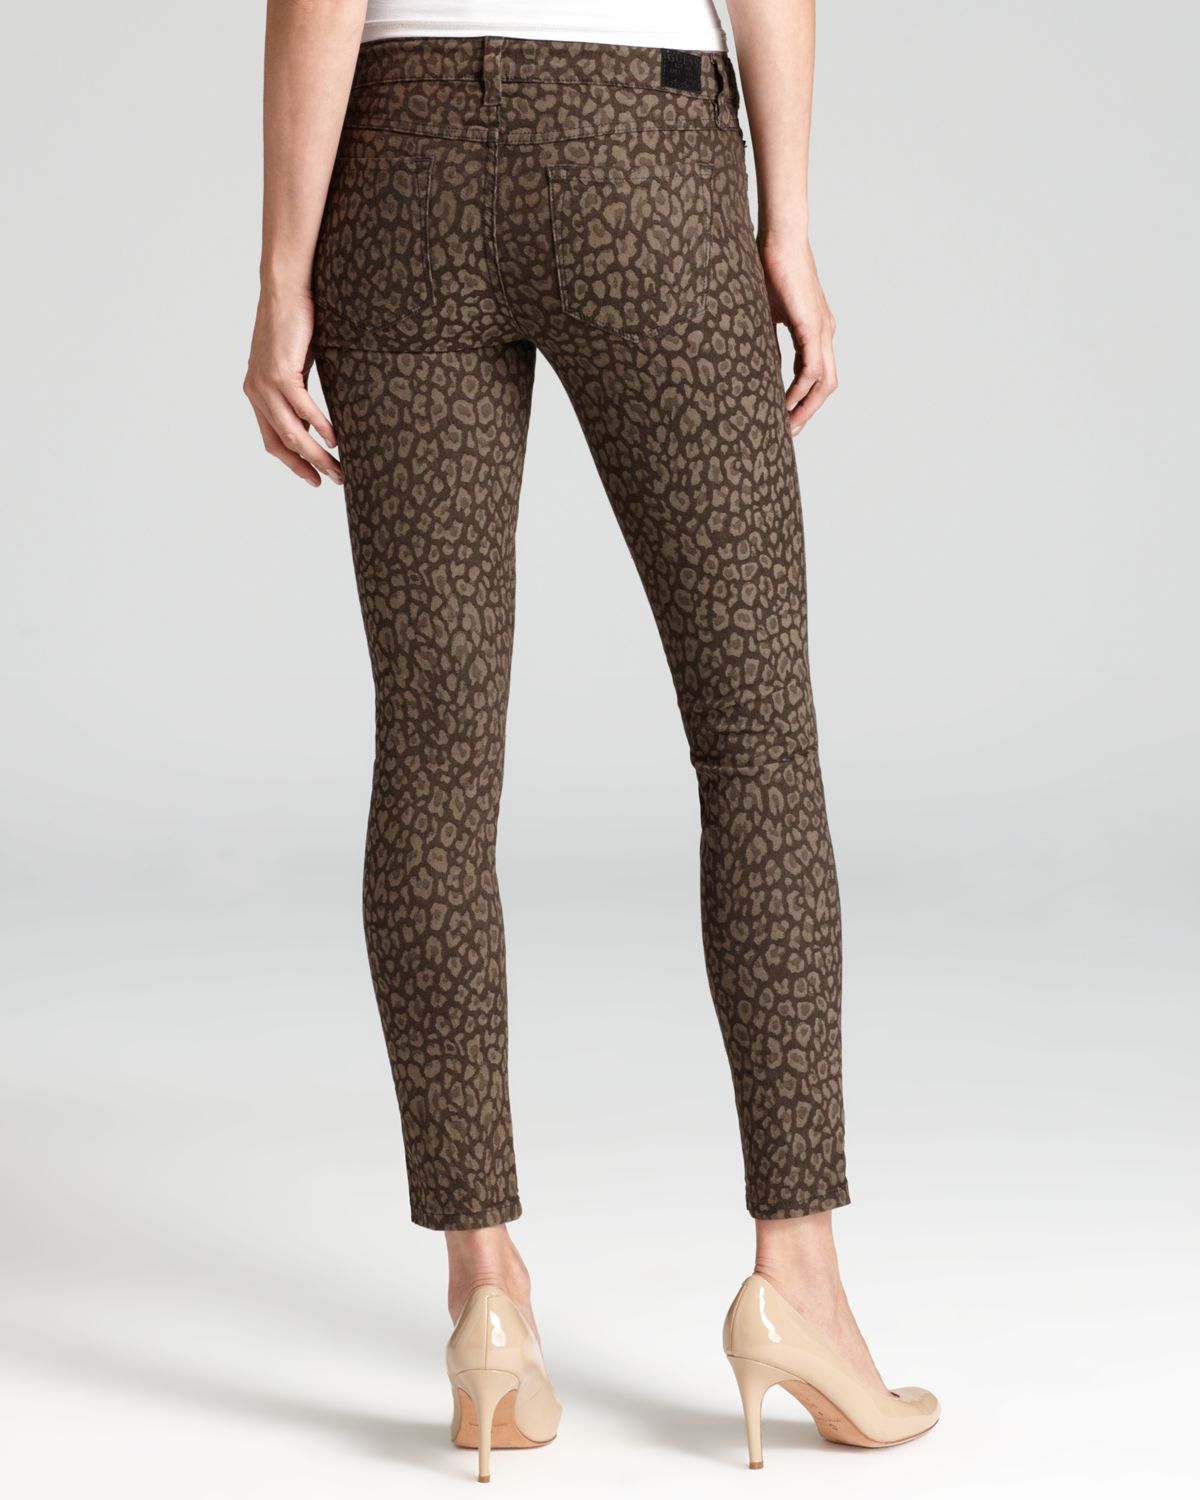 guess silicone jeans brittney skinny leopard print product 2 10869630 732224783